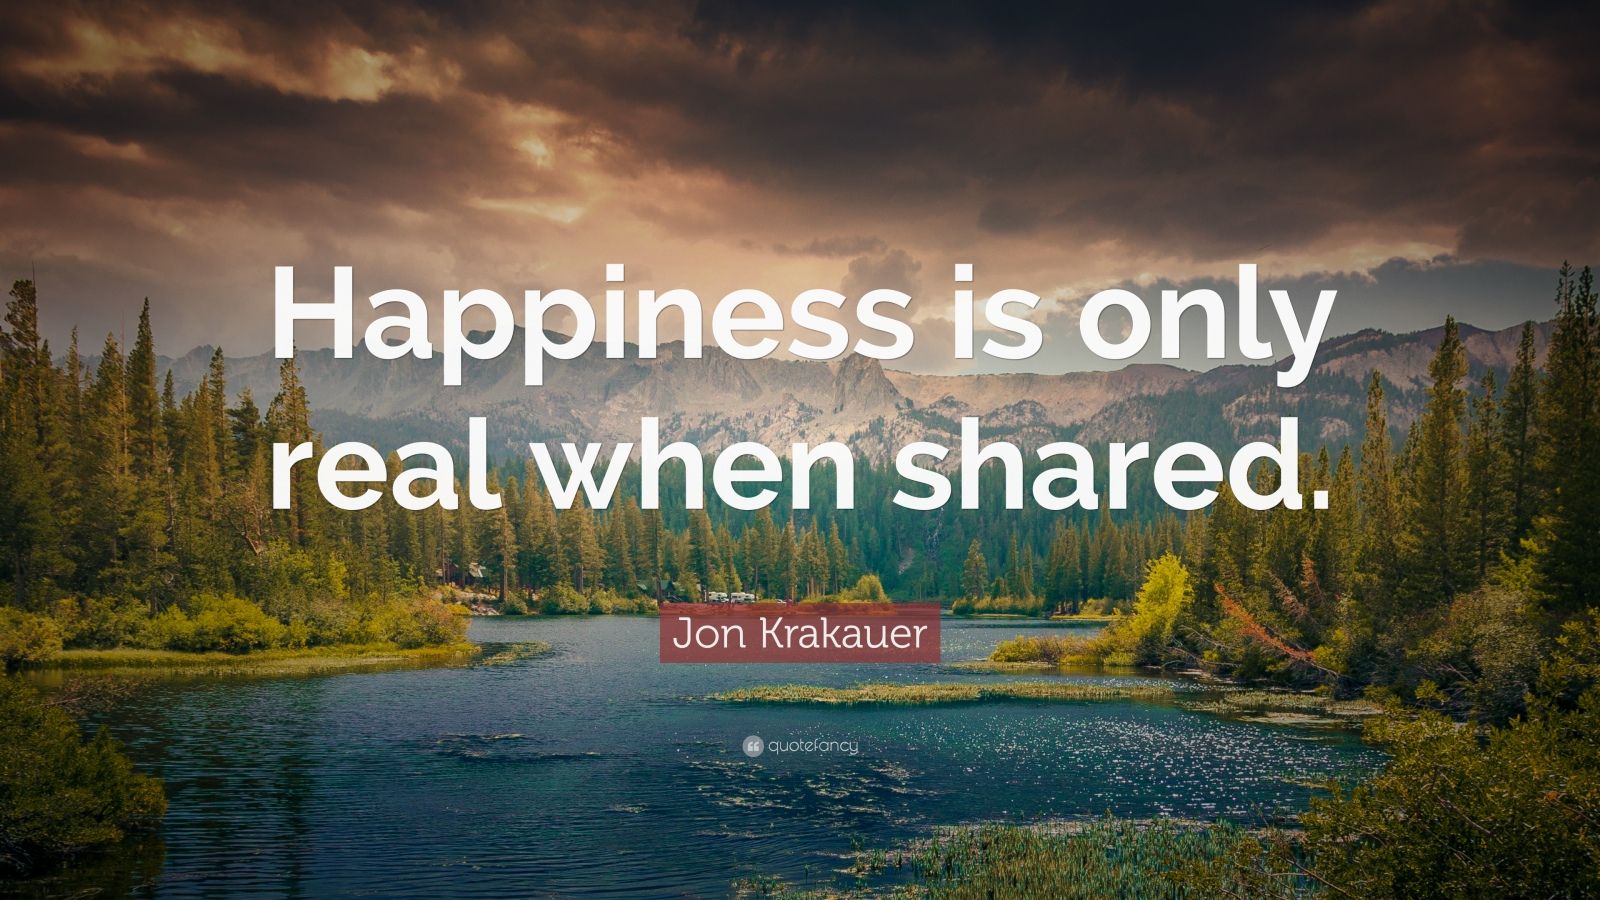 45790 Jon Krakauer Quote Happiness is only real when shared